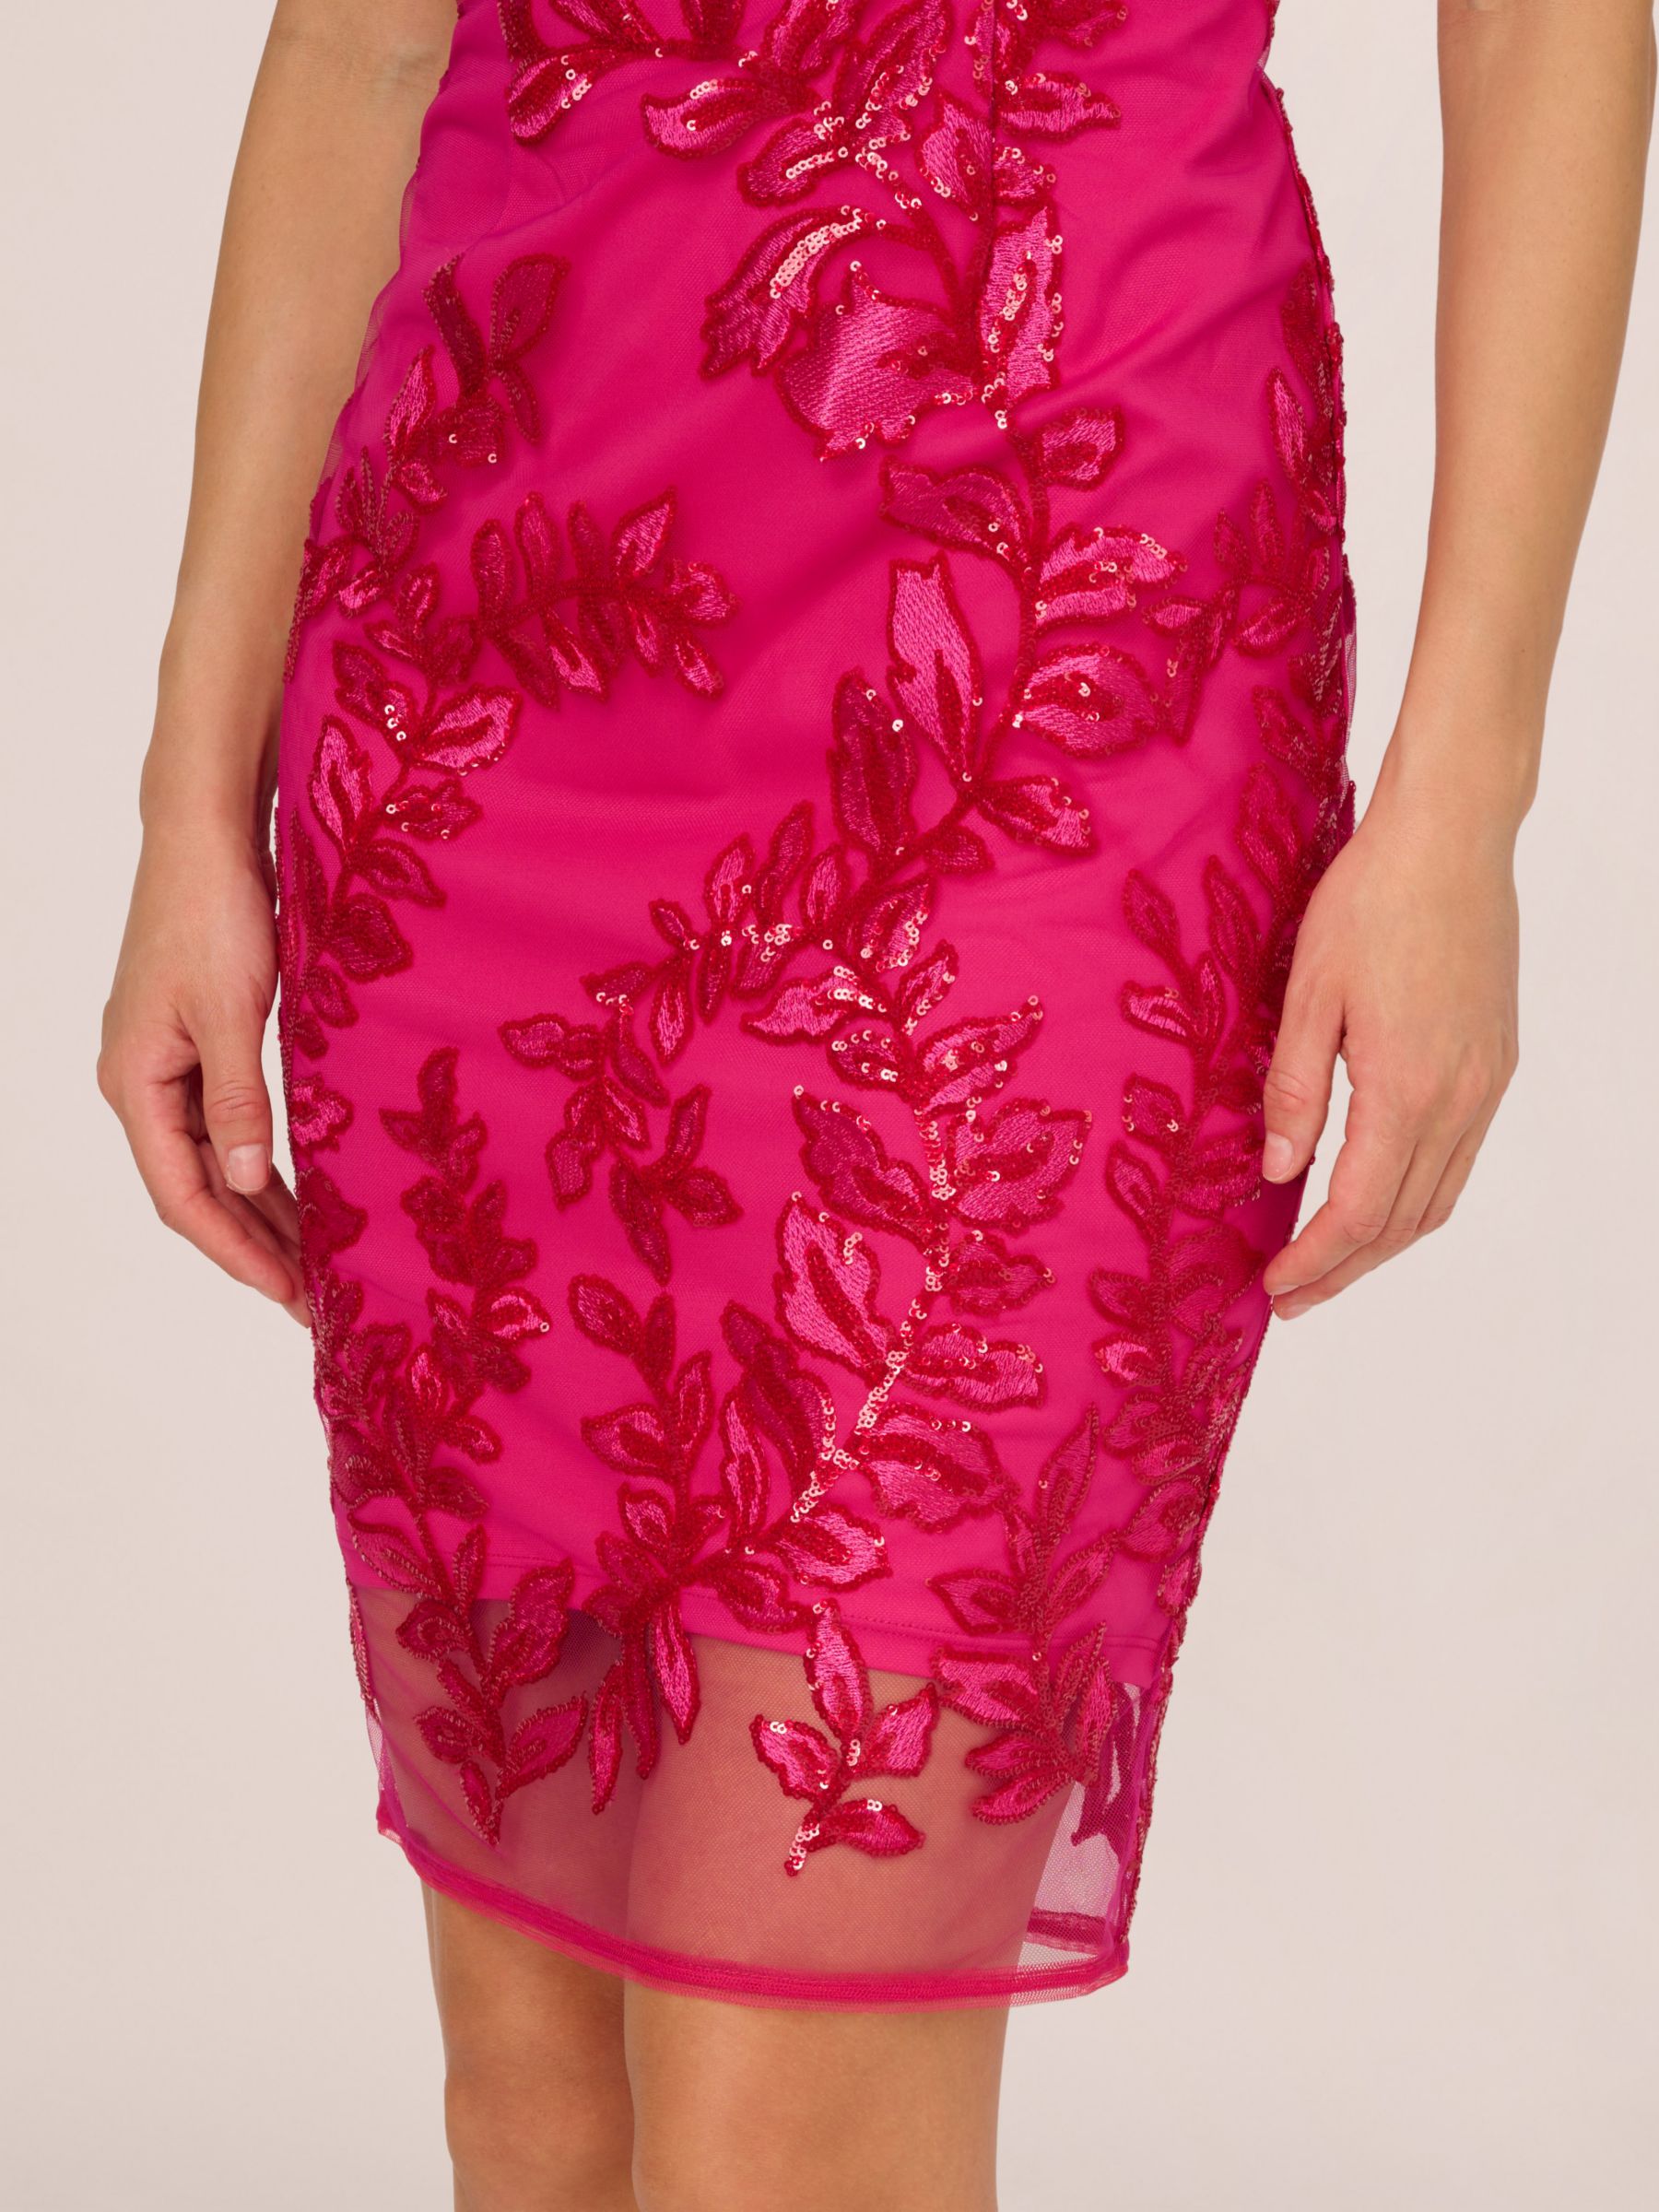 Adrianna Papell Sequin Leaf Sheath Dress, Hot Pink, 6